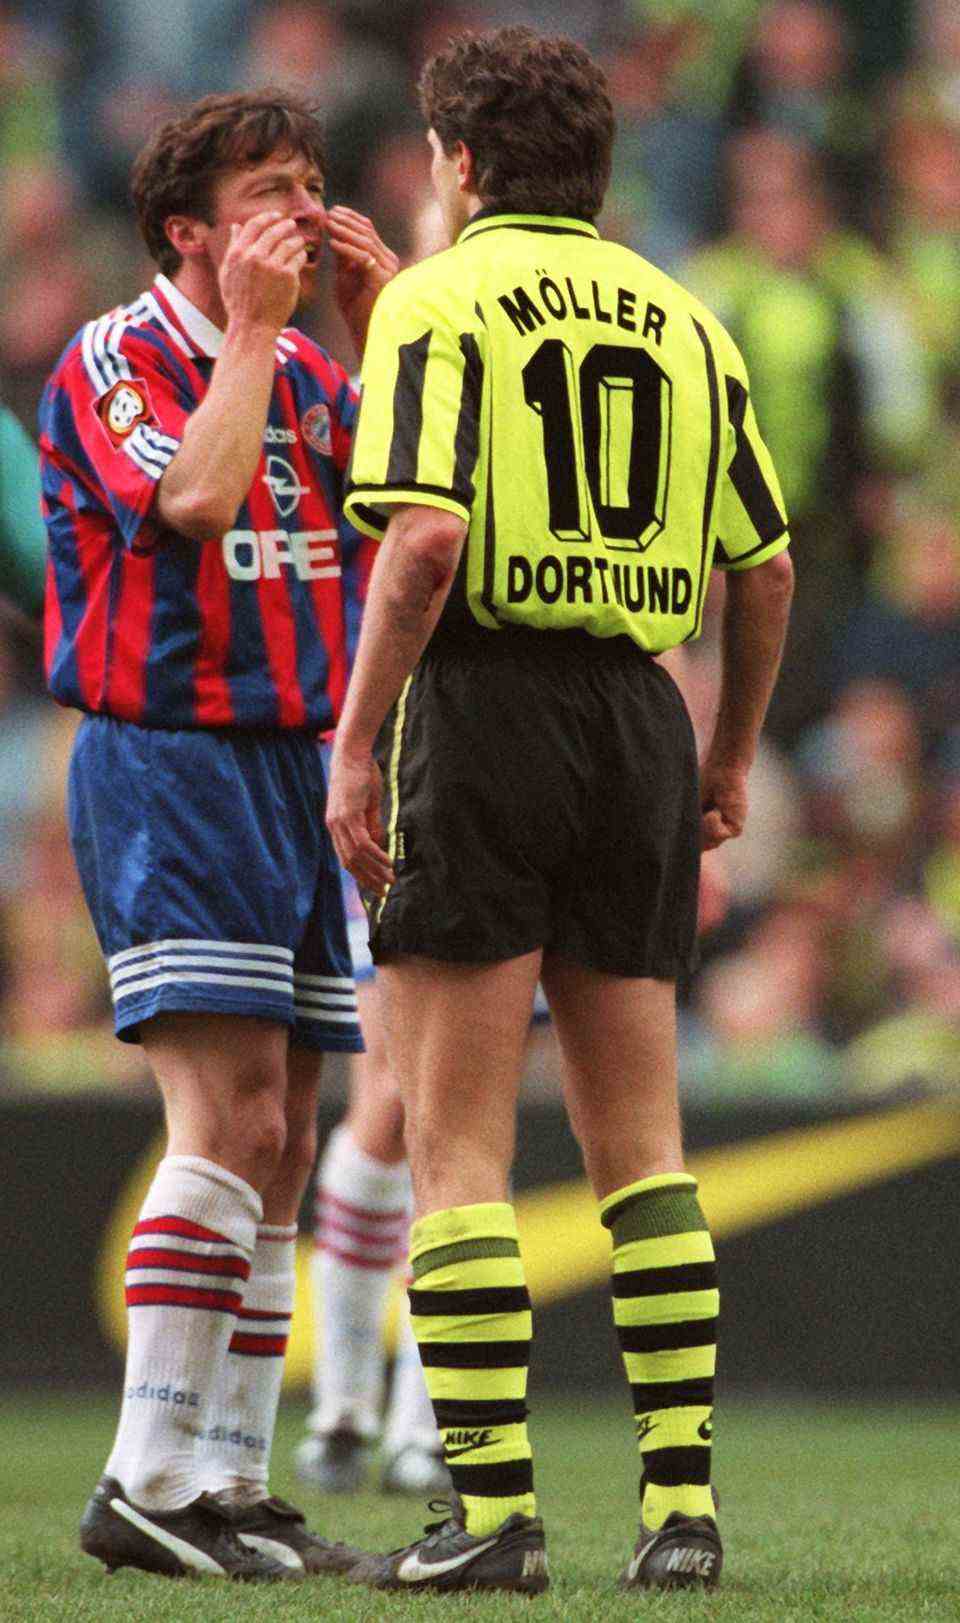 "crybaby" Möller Lothar Matthäus mocks BVB midfielder Andreas Möller in April 1997. With his gesture, the Bayern captain recalls Möller's nickname, "crybaby", which sticks with him to this day.  Of course, Möller did not allow himself to be provoked by this.  He played well and the game ended 1-1.